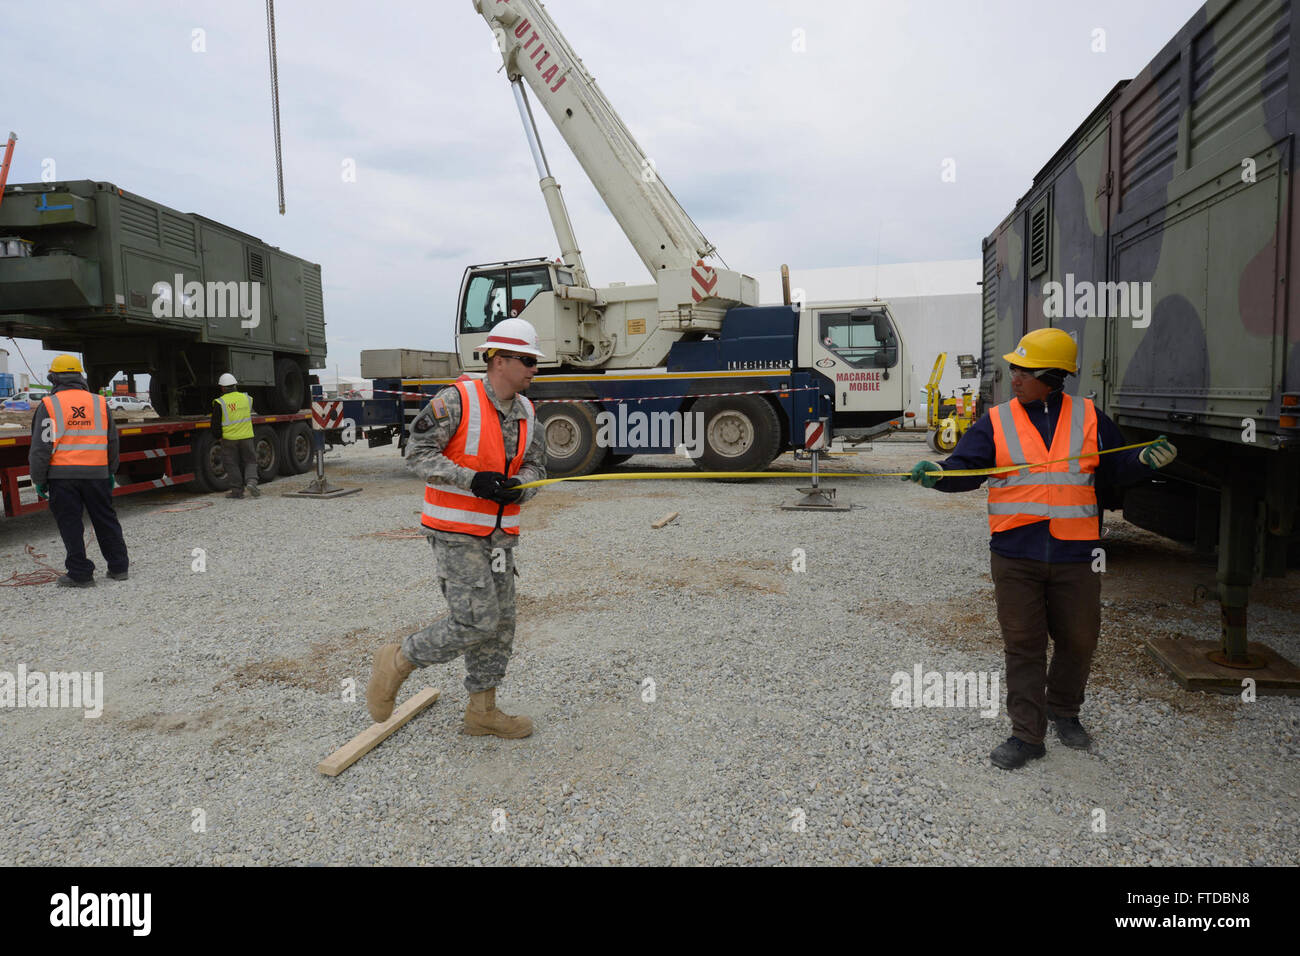 150418-N-TQ904-024 NAVAL SUPPORT FACILITY DEVESELU, Romania (April 18, 2015) Sgt. 1st Class Aaron Norris works with civilian contractors to install a generator at Naval Support Facility Deveselu, Romania, April 18, 2015. Members of the U.S. Army Corps of Engineers 249th Engineer Battalion transported four generators from Fort Belvoir, Virginia, and installed them into Deveselu’s Aegis Ashore facility. (U.S. Navy photo by Lt. Cmdr. Mike Billips/Released) Stock Photo